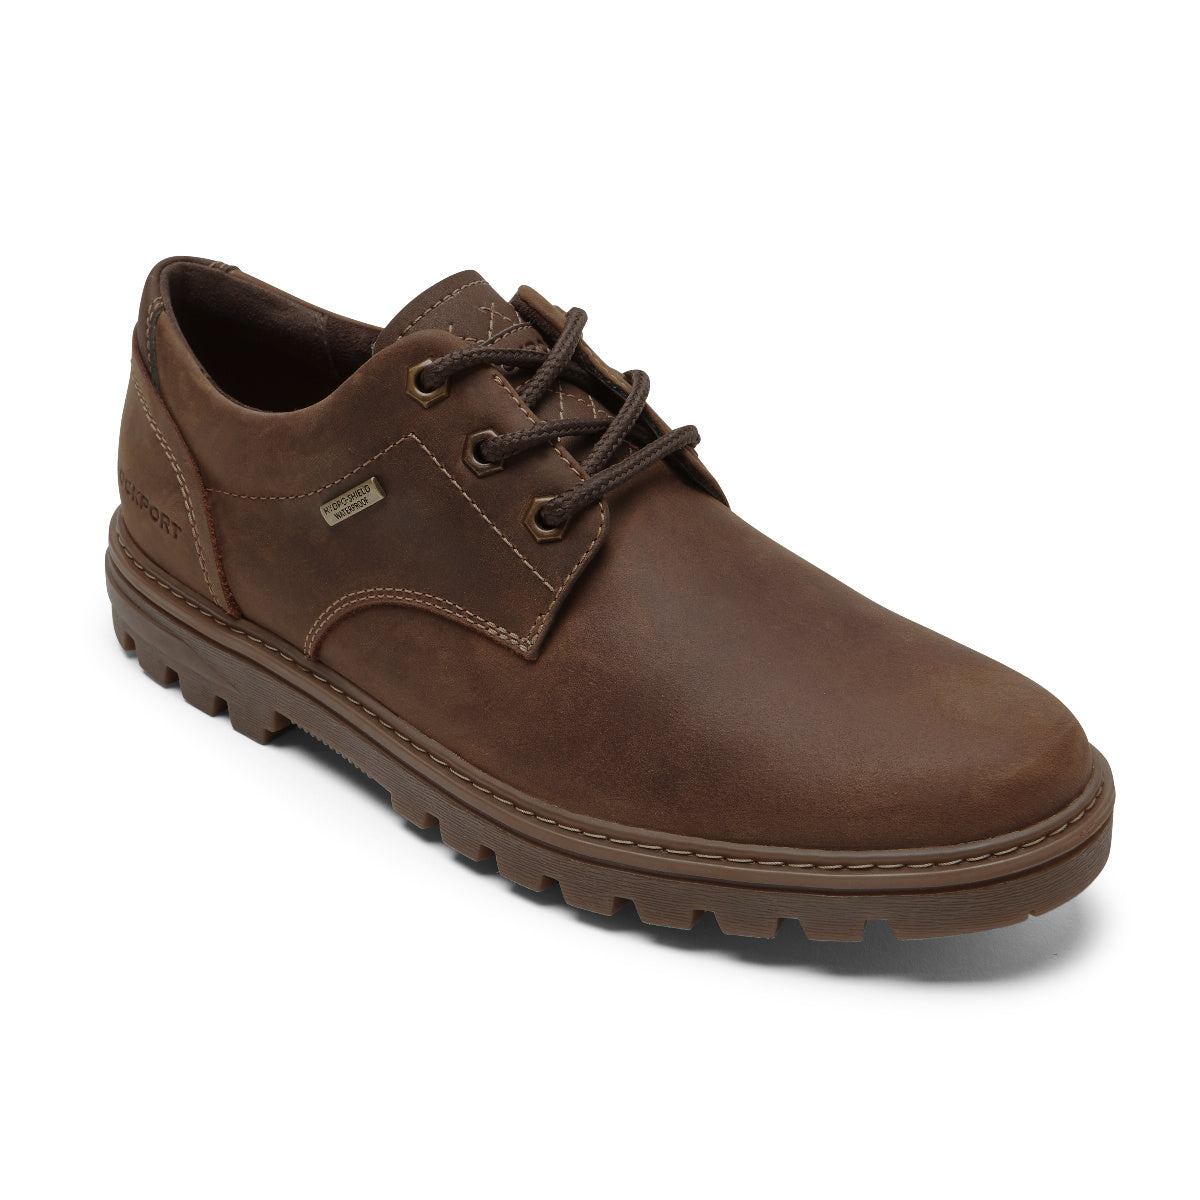 Rockport Mens Weather or Not Waterproof Oxford